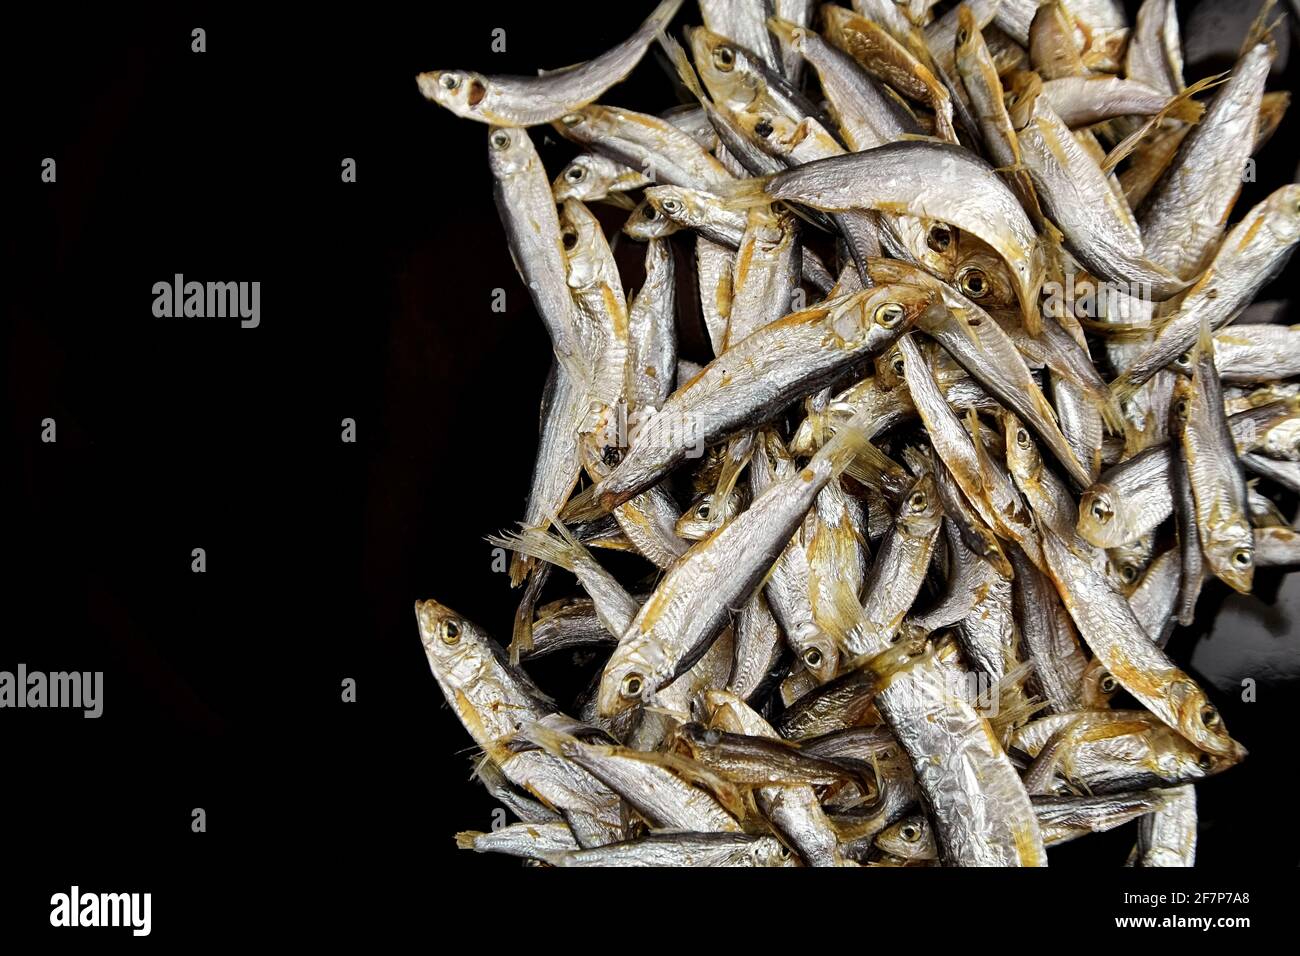 Dried salted small fish on black background, top view, copy space. Stock Photo